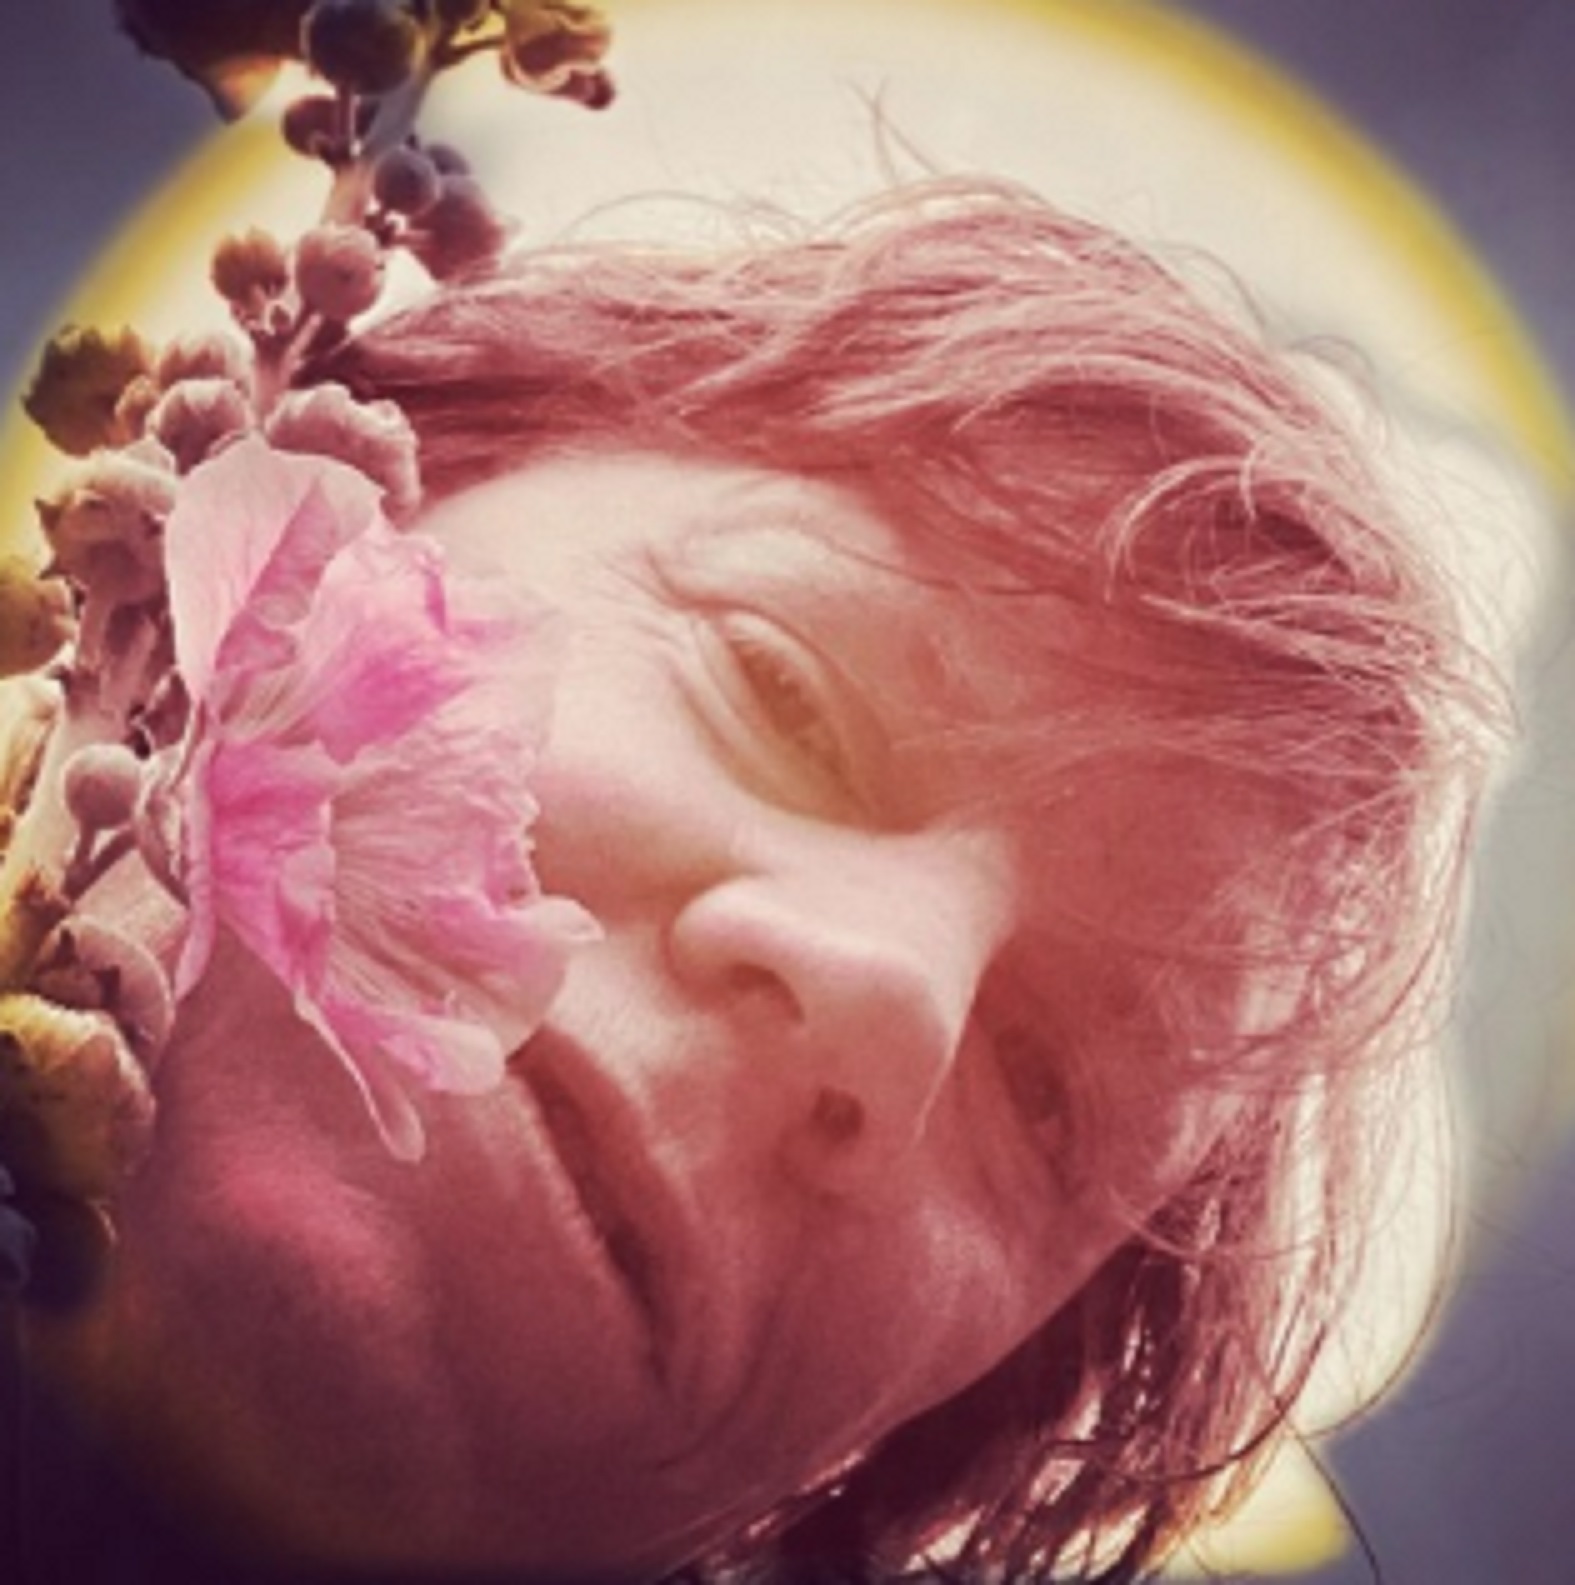 Thurston Moore Releases New Single ﻿“Rewilding” For Earth Day